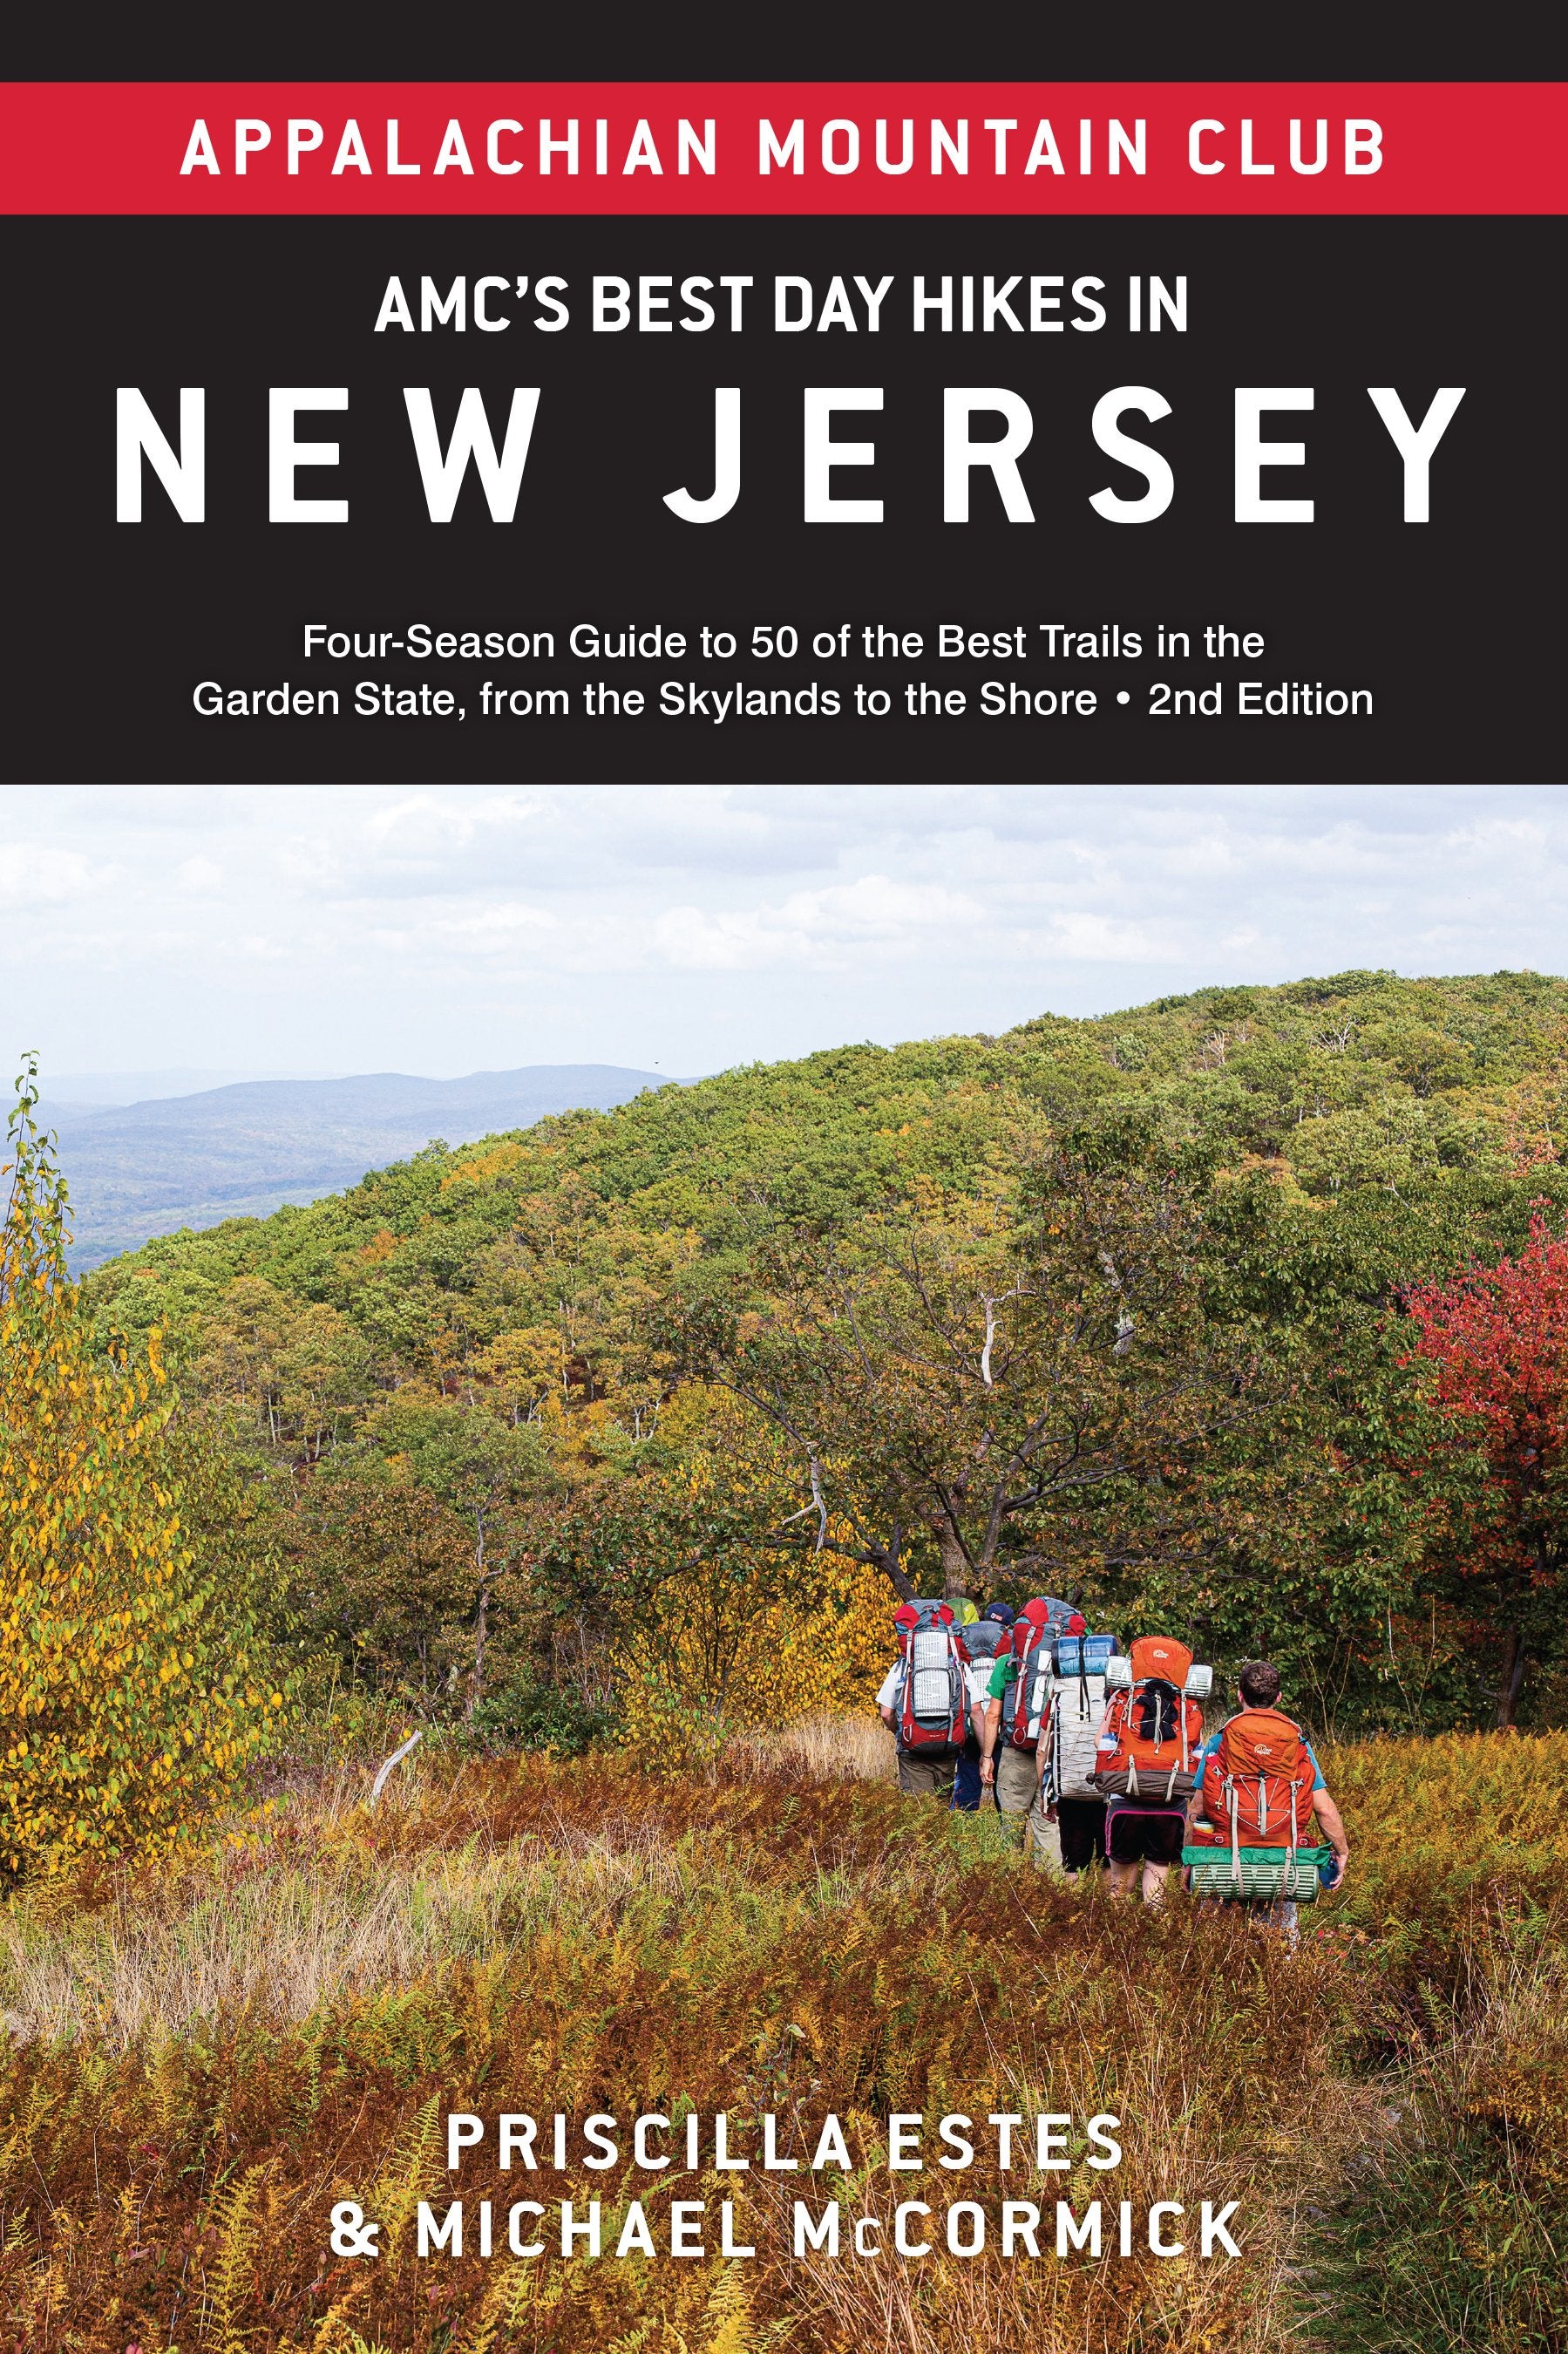 AMC's Best Day Hikes in New Jersey, 2nd Edition